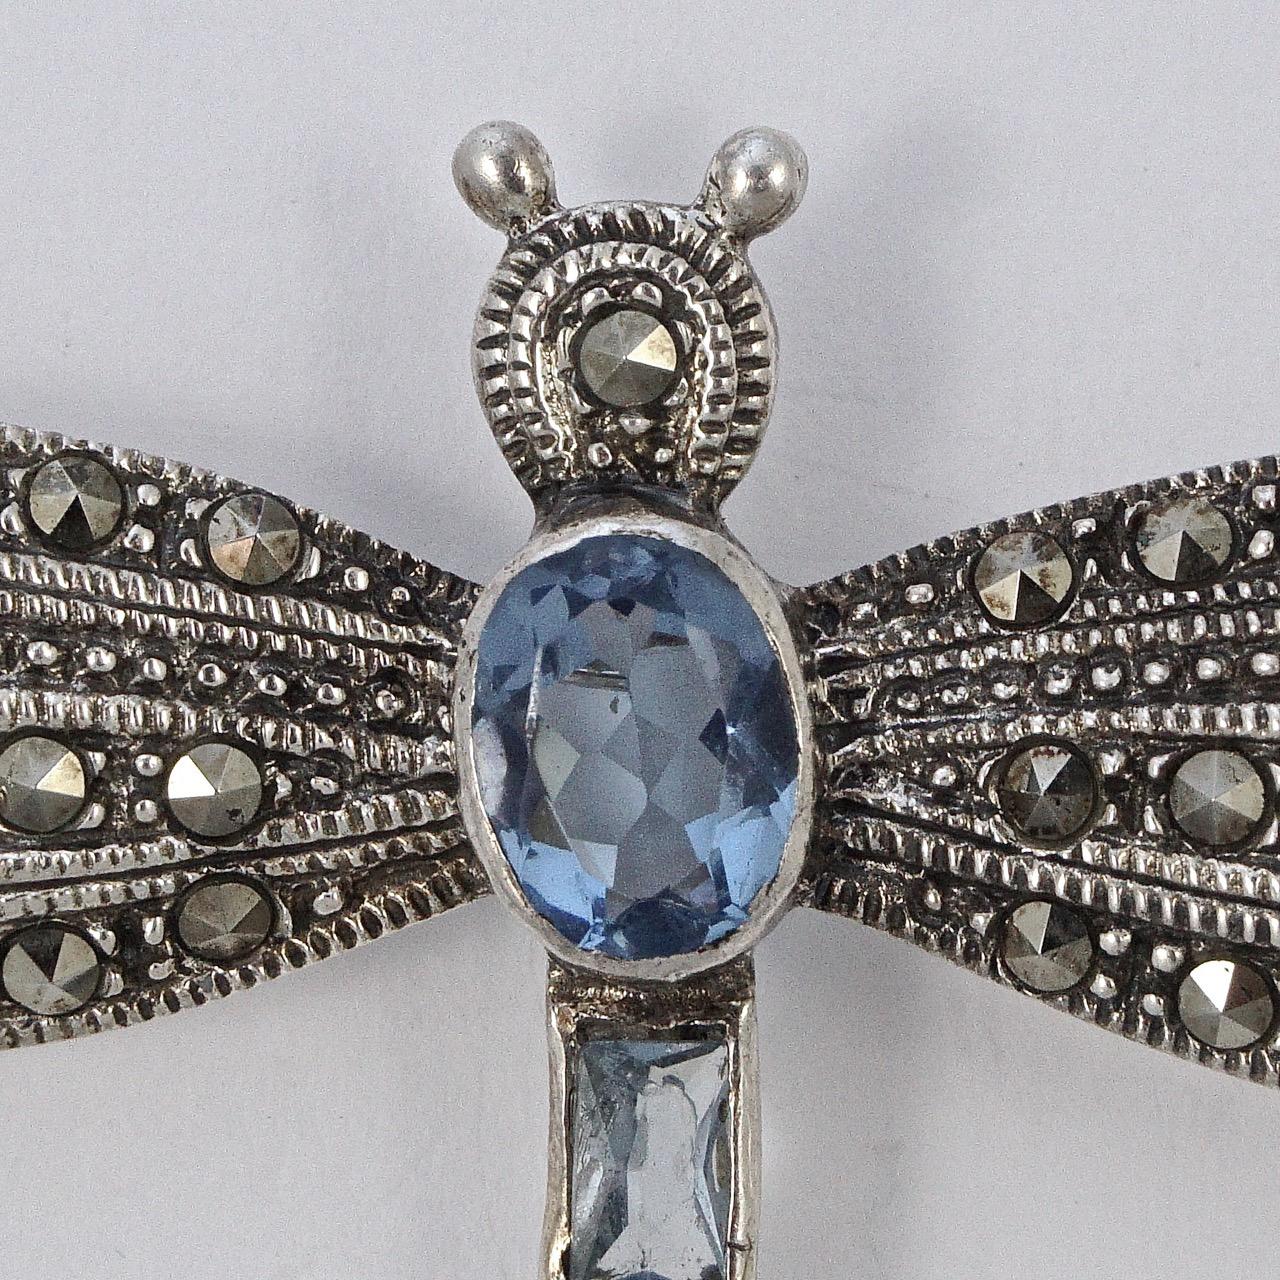 Beautiful detailed sterling silver dragonfly brooch, embellished with marcasites and set with blue glass stones. Measuring length 4.5cm / 1.77 inches by width 5.8cm / 2.28 inches. The brooch is stamped with a leopards head and 925, and the date